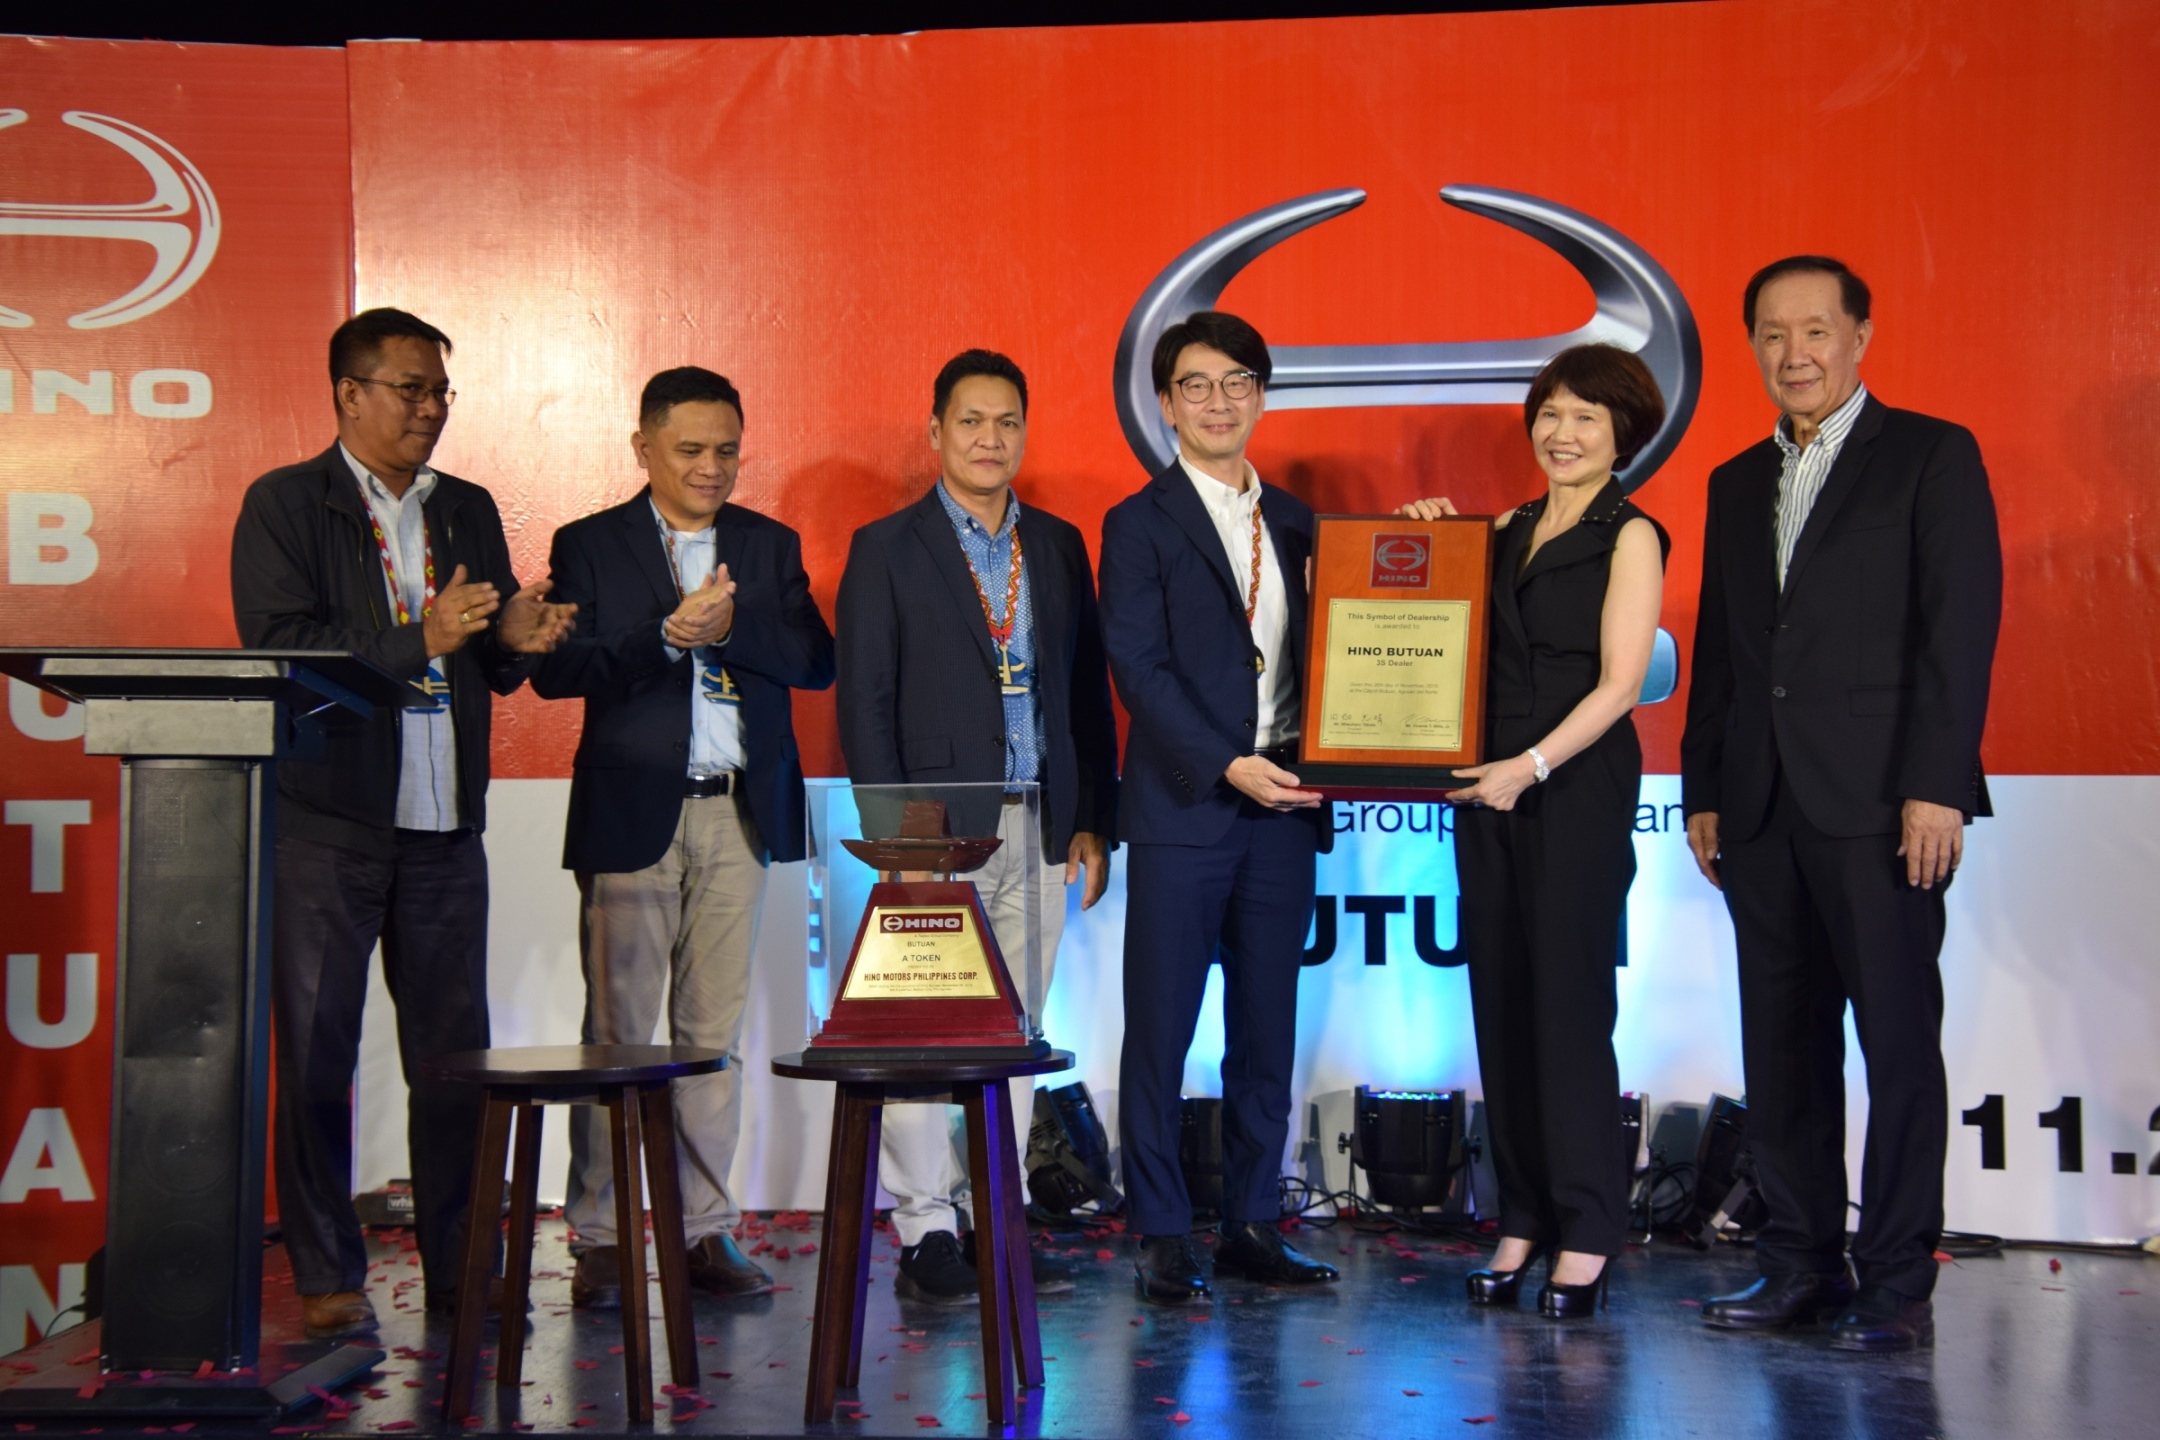 Hino unveils new dealership in Butuan